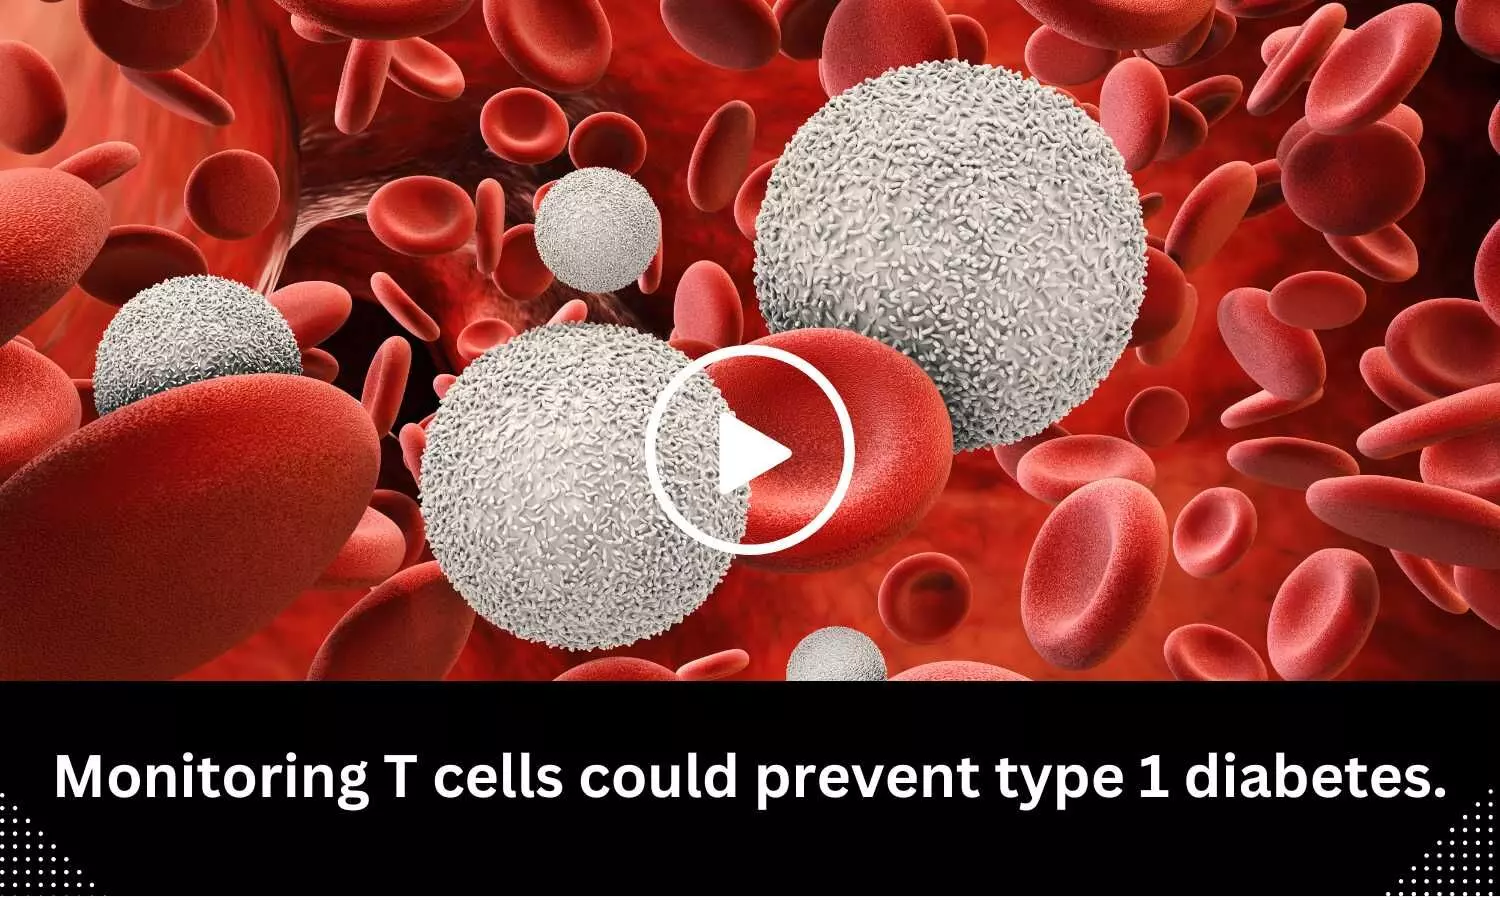 Monitoring T cells could prevent type 1 diabetes